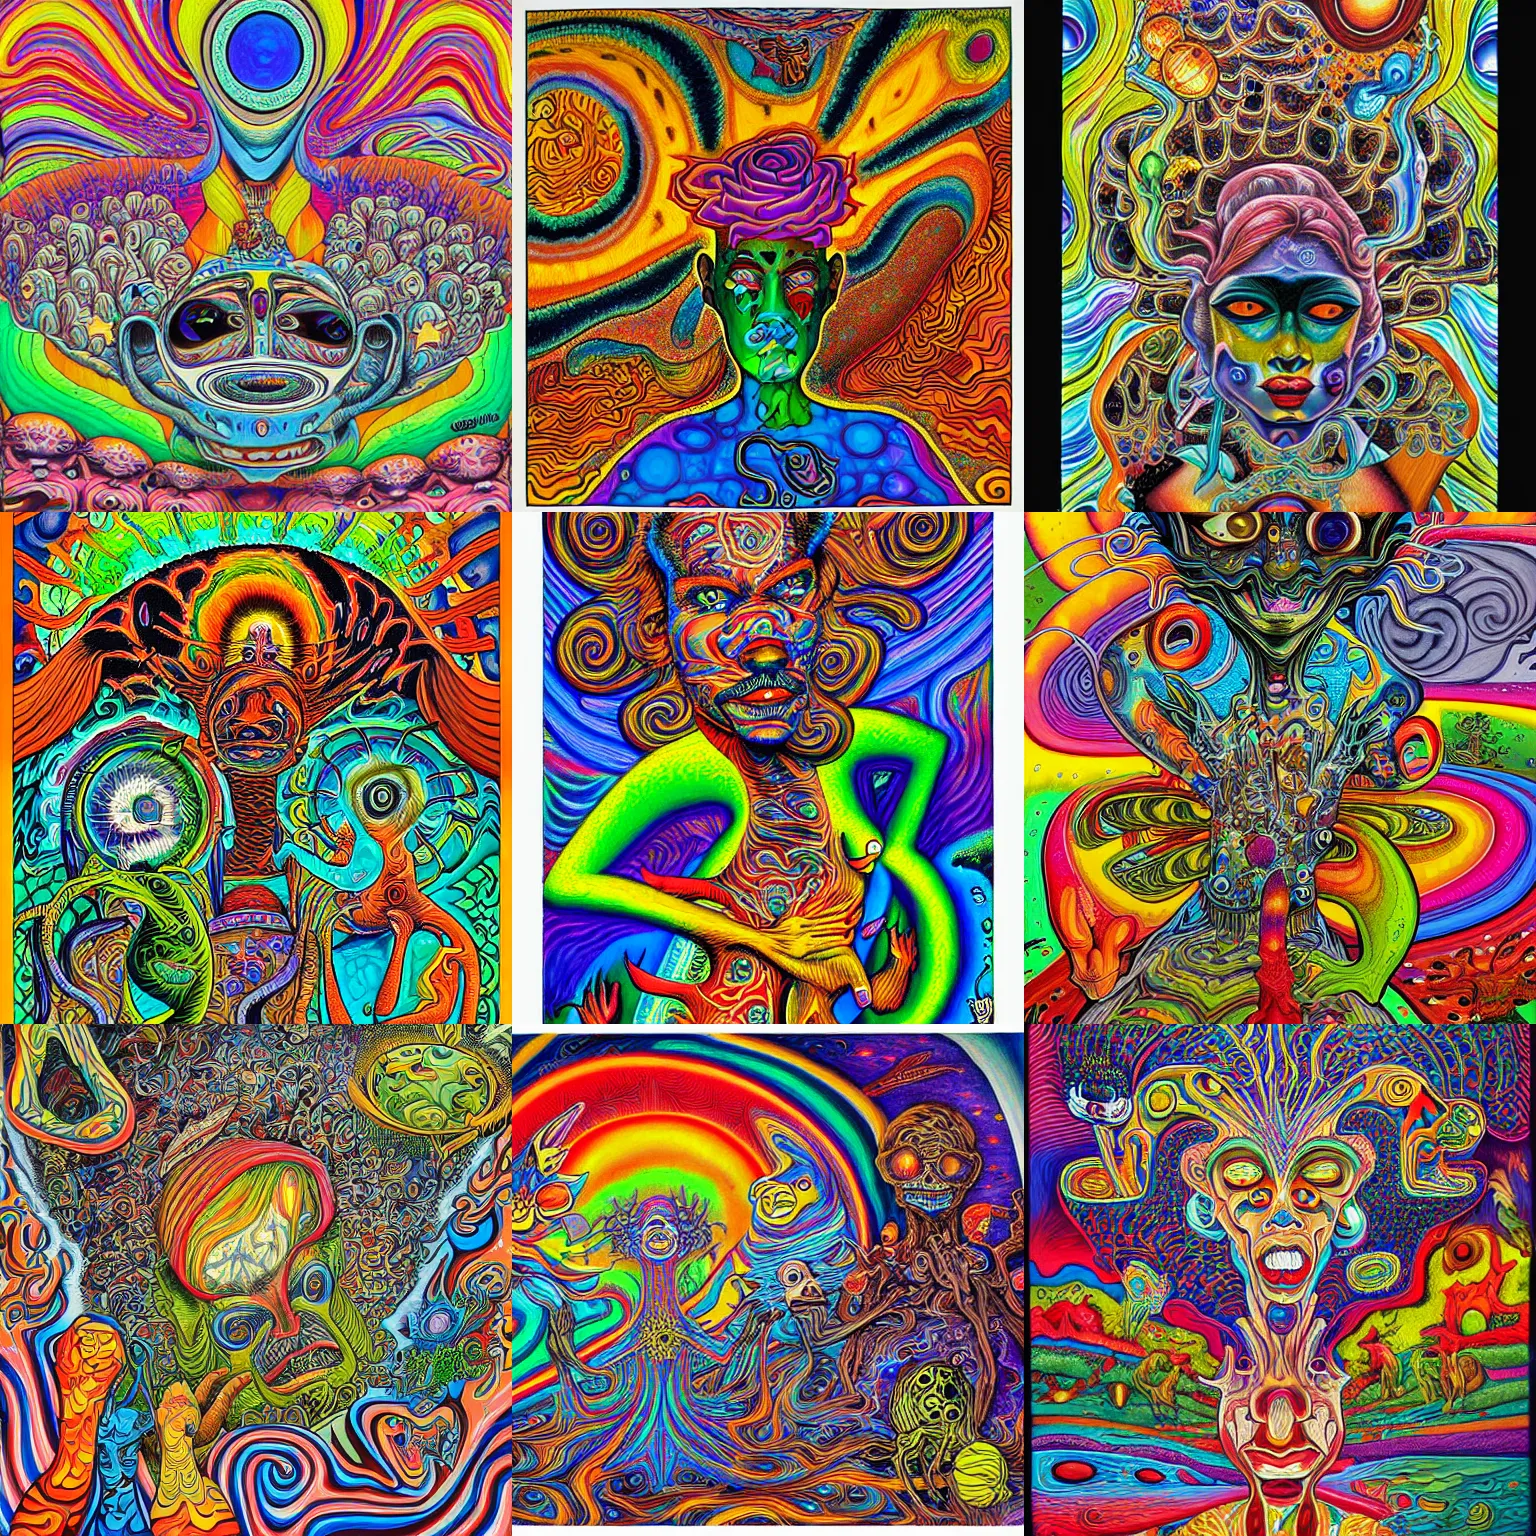 Prompt: lsd painting by aaron brooks, chris dyer, android jones, and alex grey